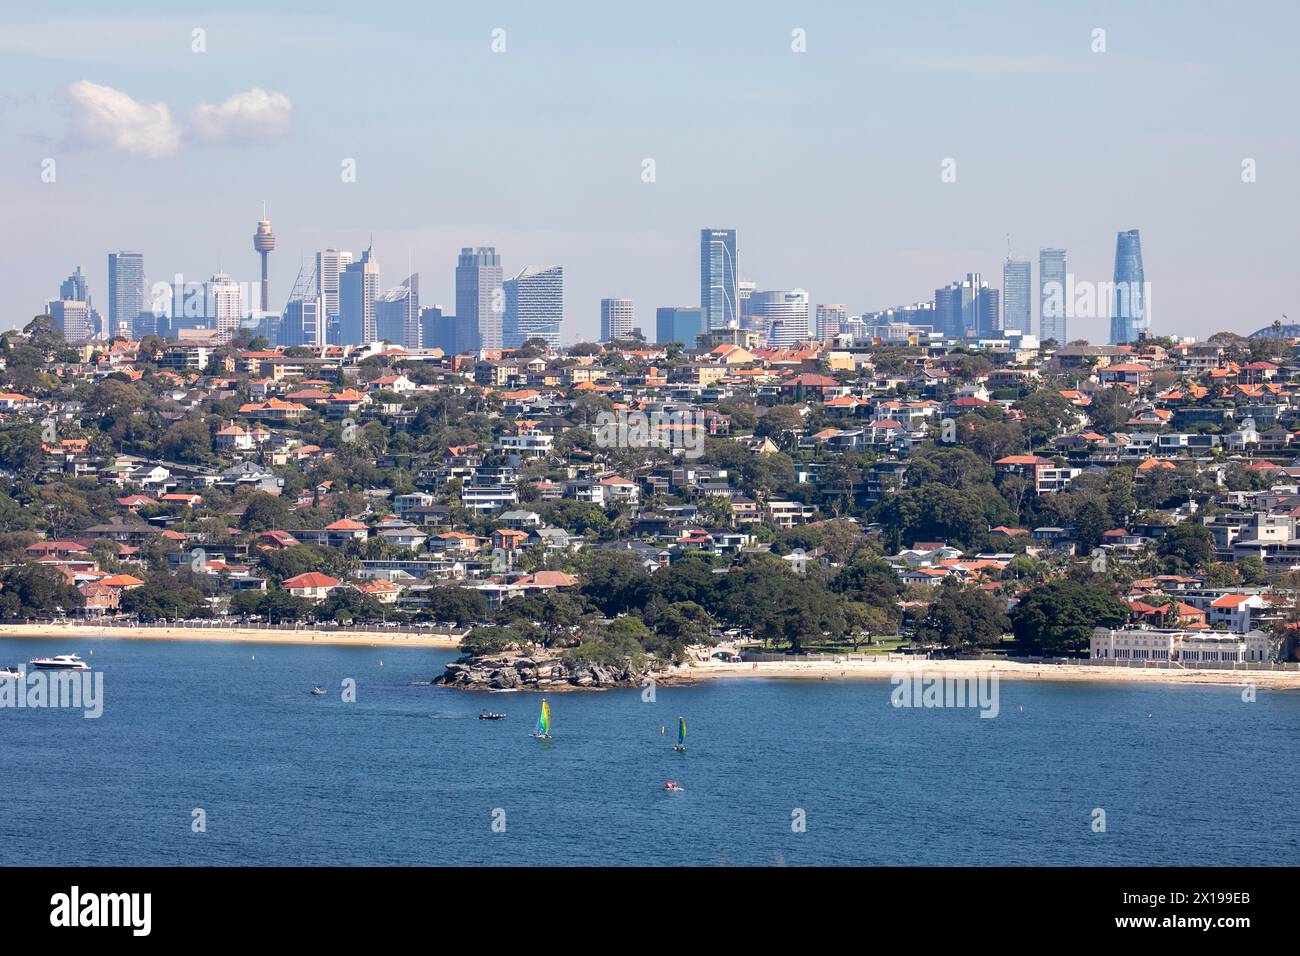 Balmoral and Edwards beach , separated by Rocky Point Island with dense urban housing and Sydney skyscrapers and city centre visible, Australia Stock Photo